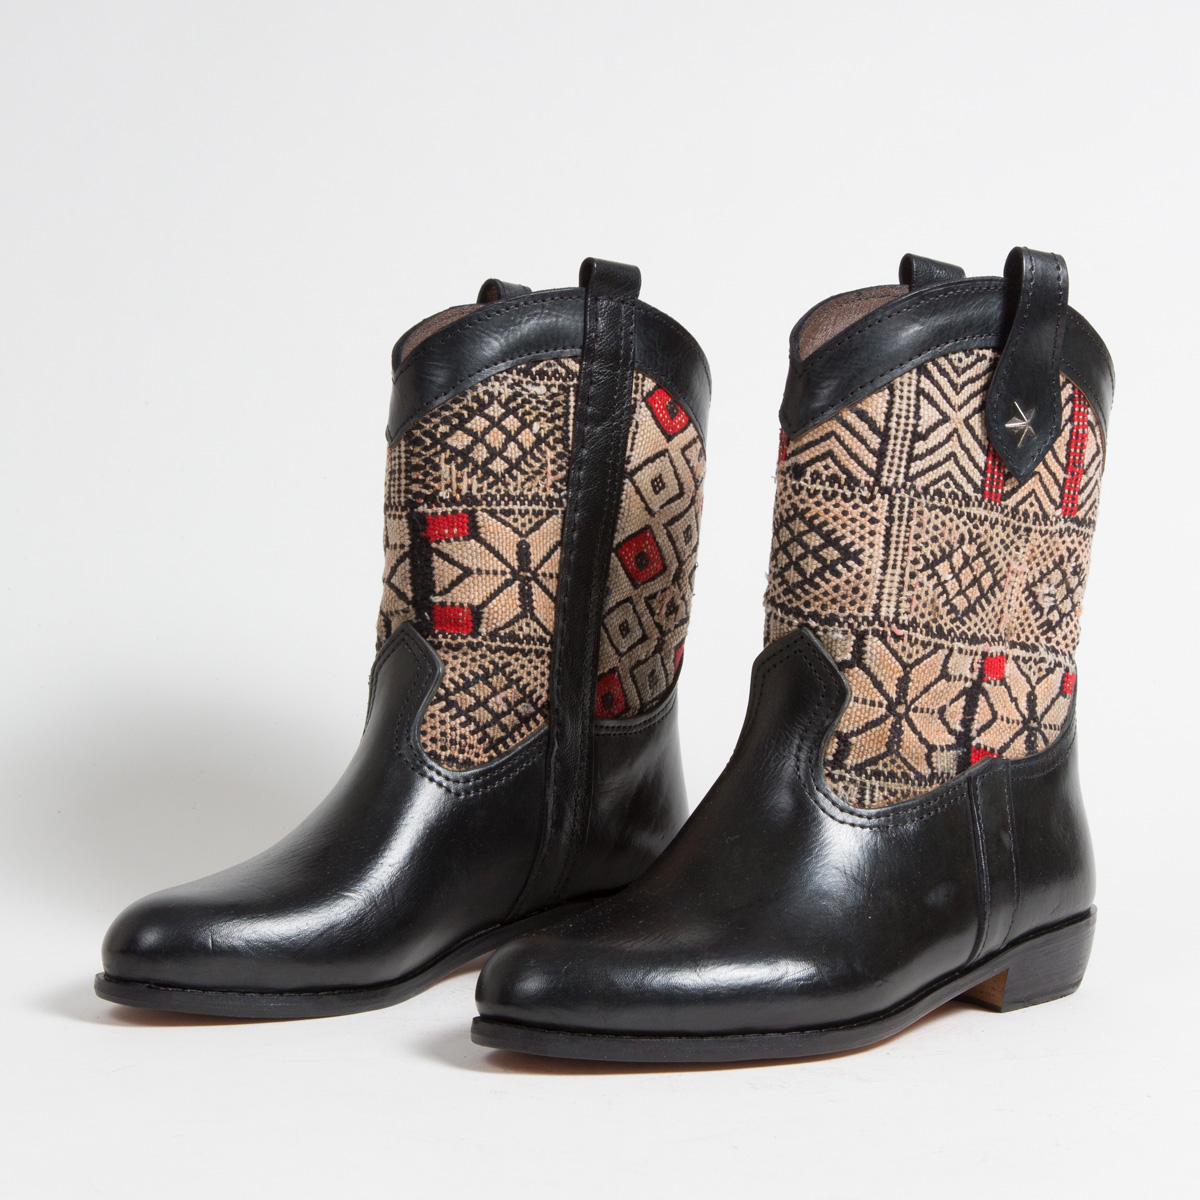 Bottines Kilim cuir mababouche artisanales (Réf. MN12-40)